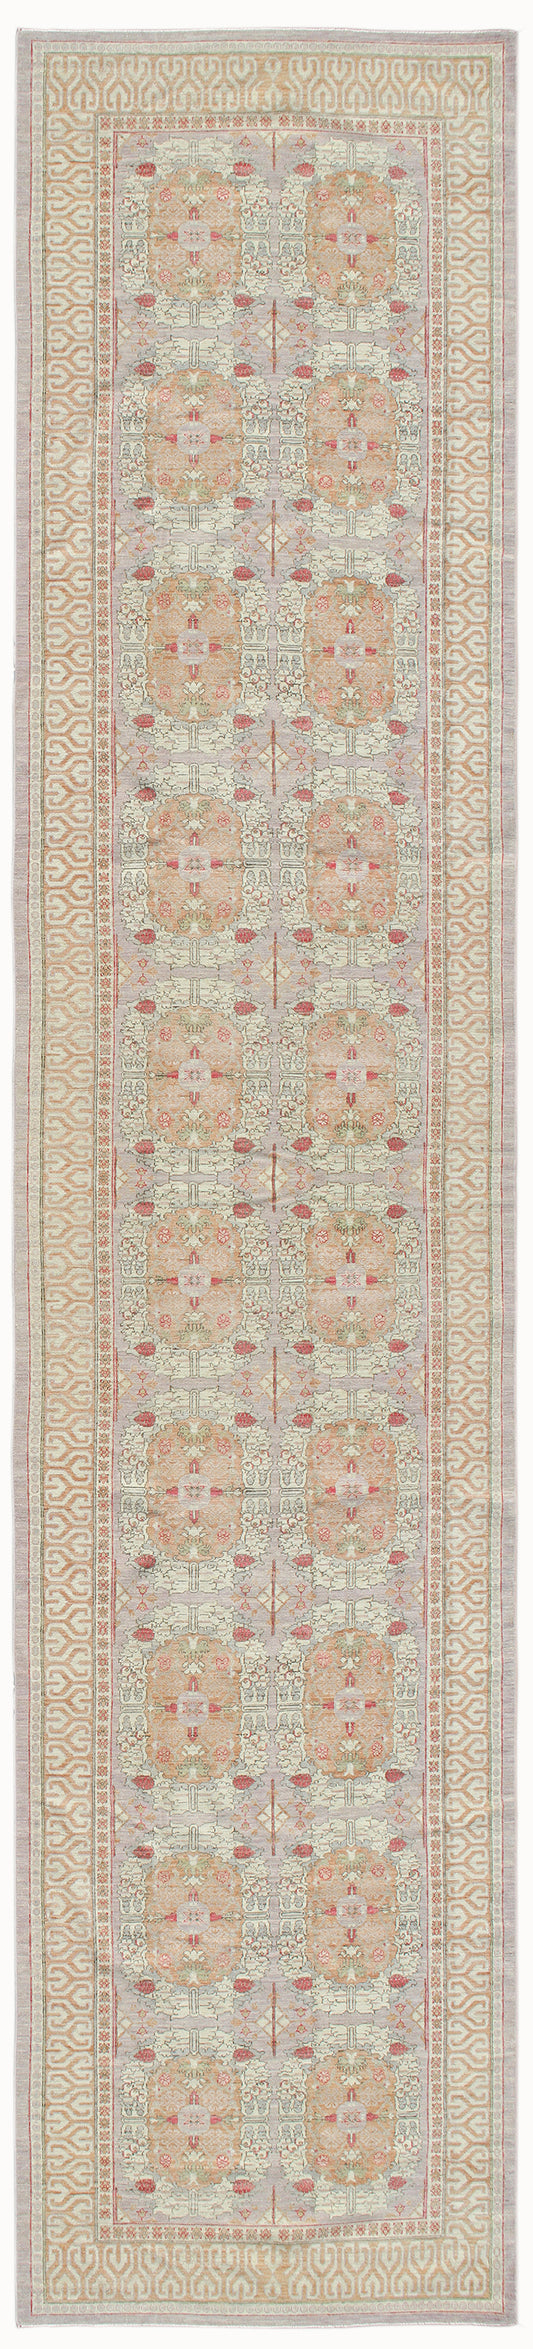 5'x21'Ariana Transitional Wide and Long Ivory Red Cream Runner Rug